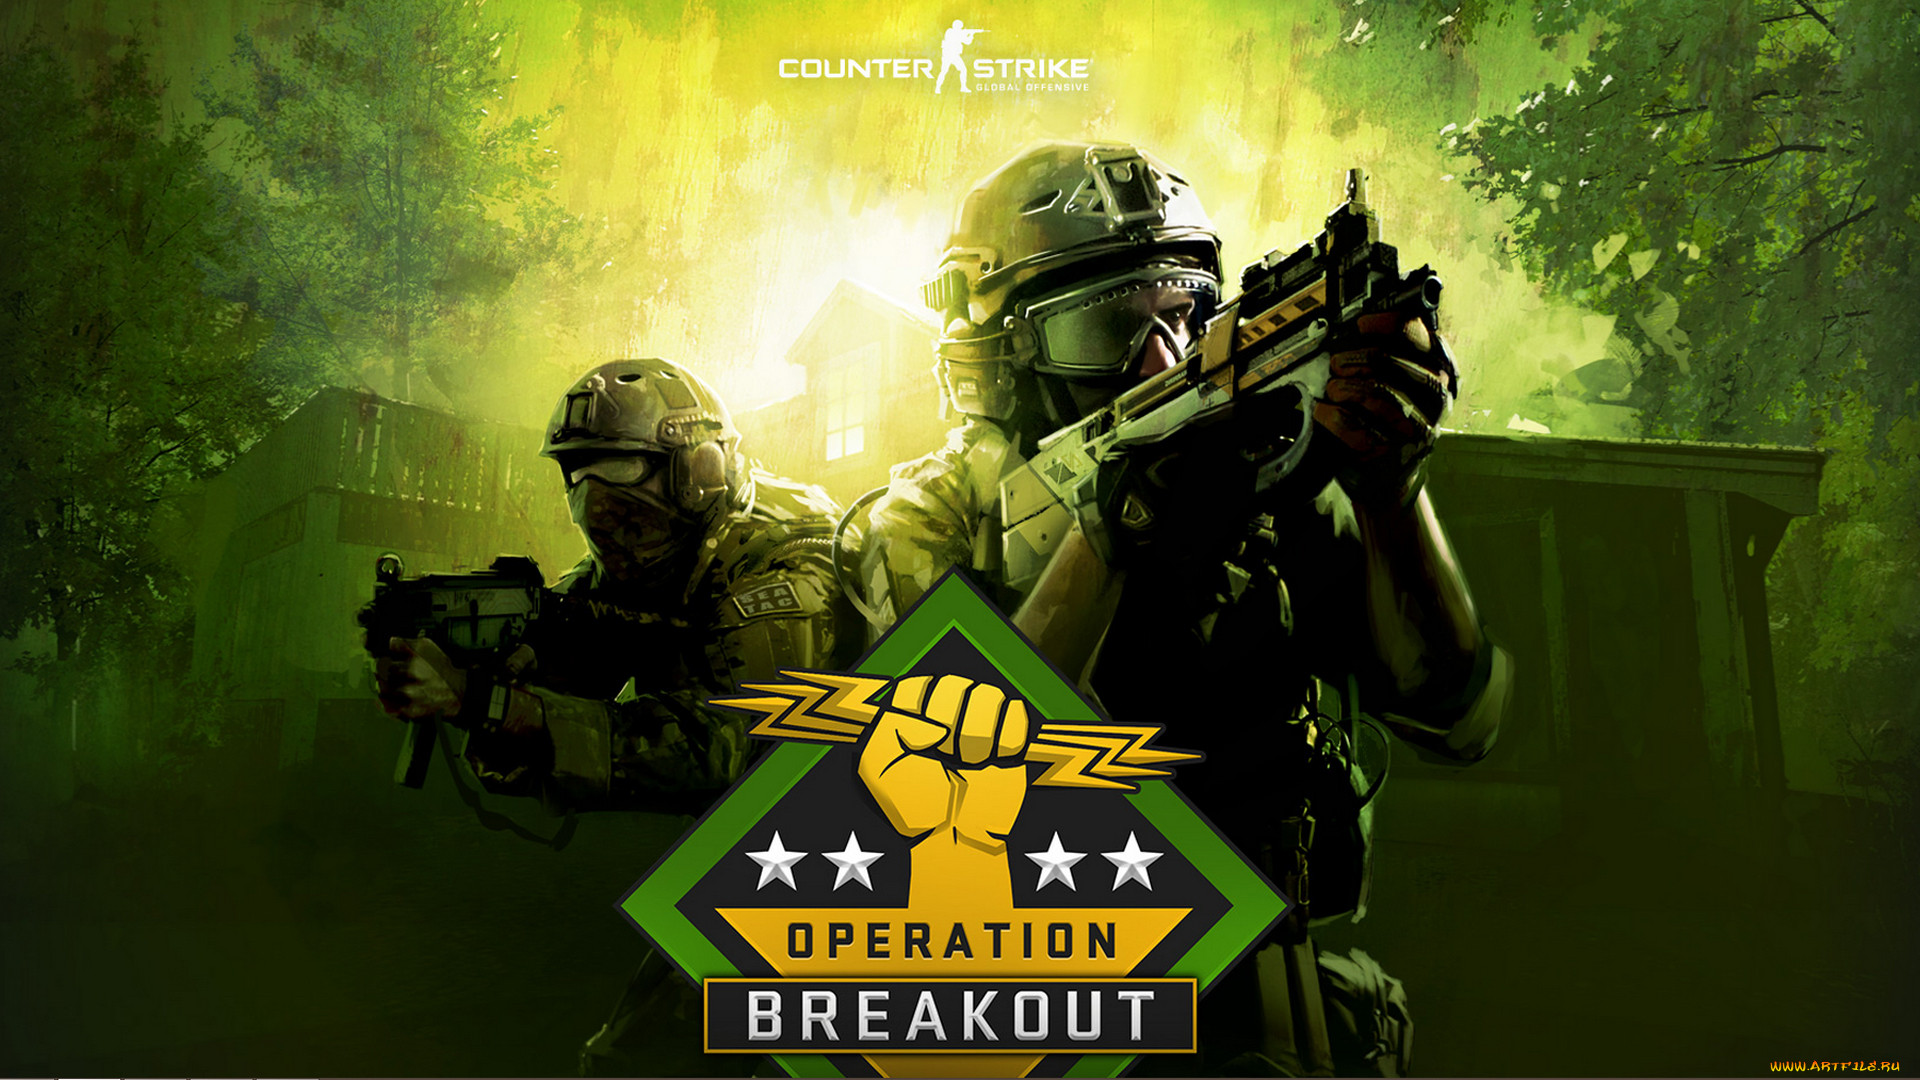 counter-strike global offensive,  , counter-strike,  global offensive, breakout, cs, go